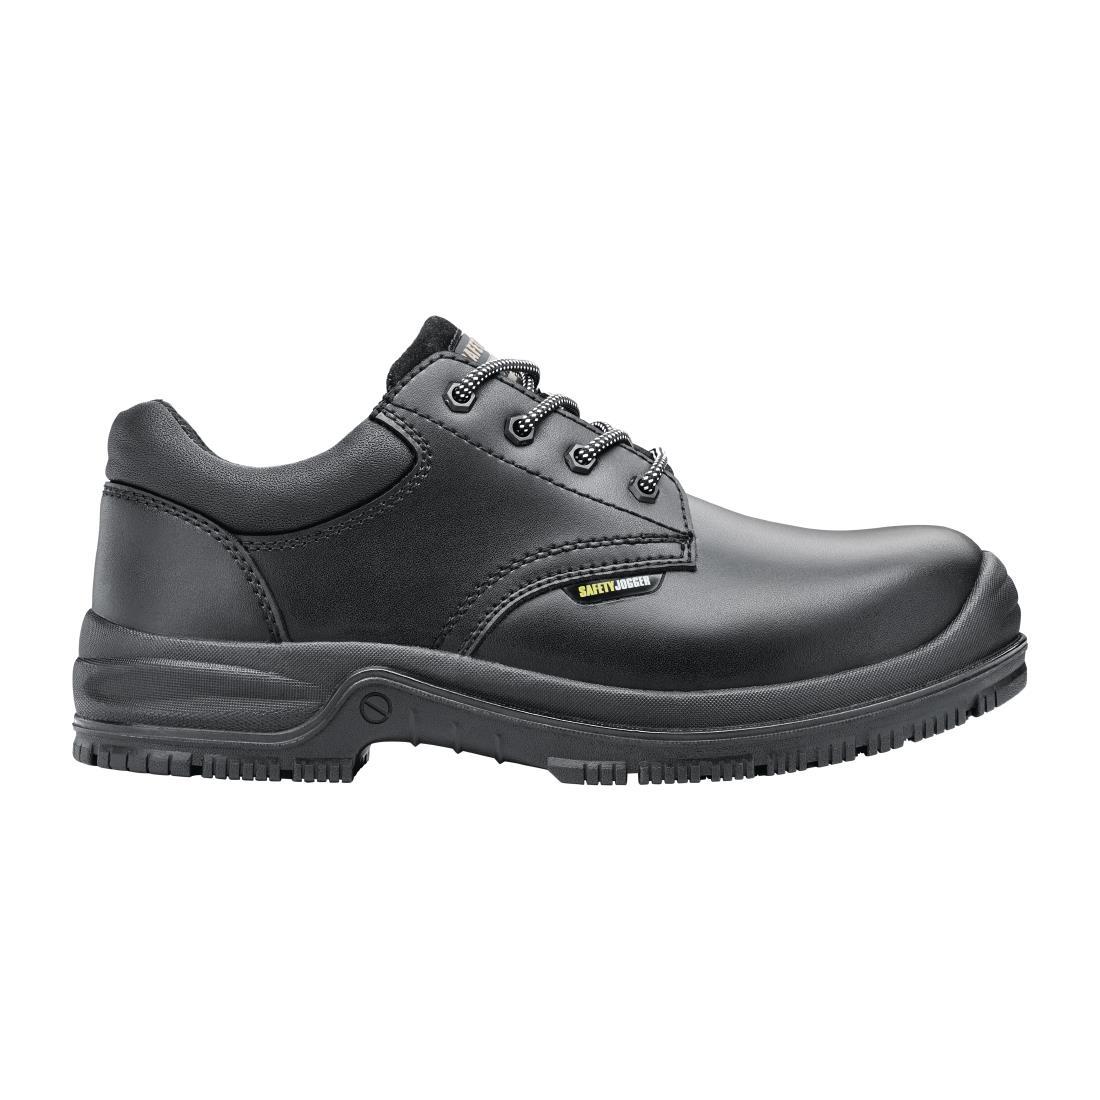 Shoes for Crews X111081 Safety Shoe Black Size 36 - BB596-36  - 1